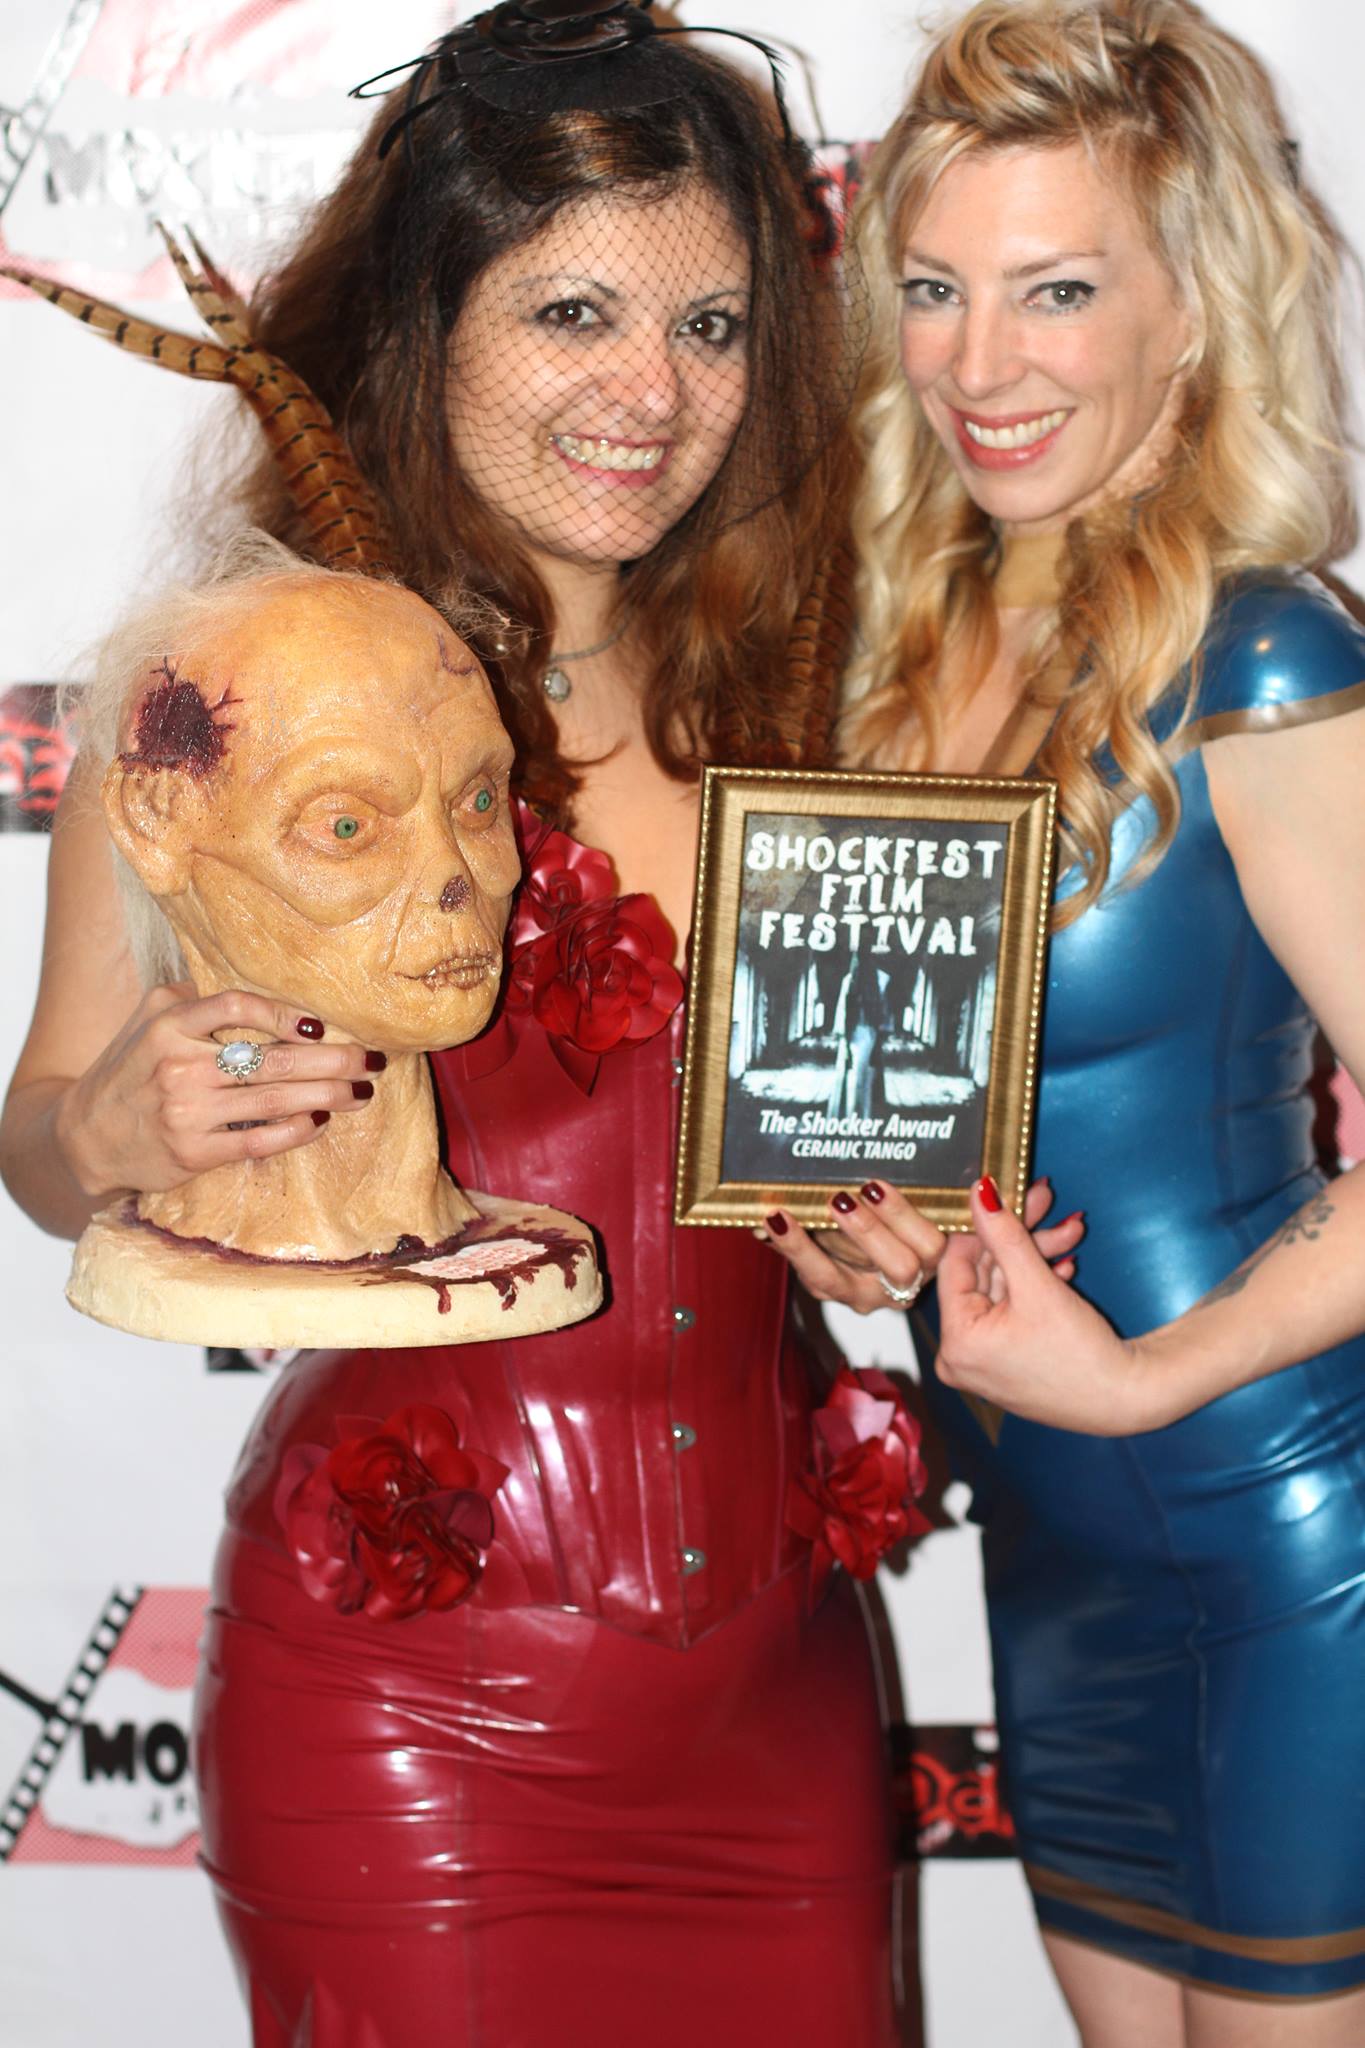 Los Angeles Shockfest Film Festival, 2014. Patricia Chica, director of Ceramic Tango and I winning the top award for best film of the festival